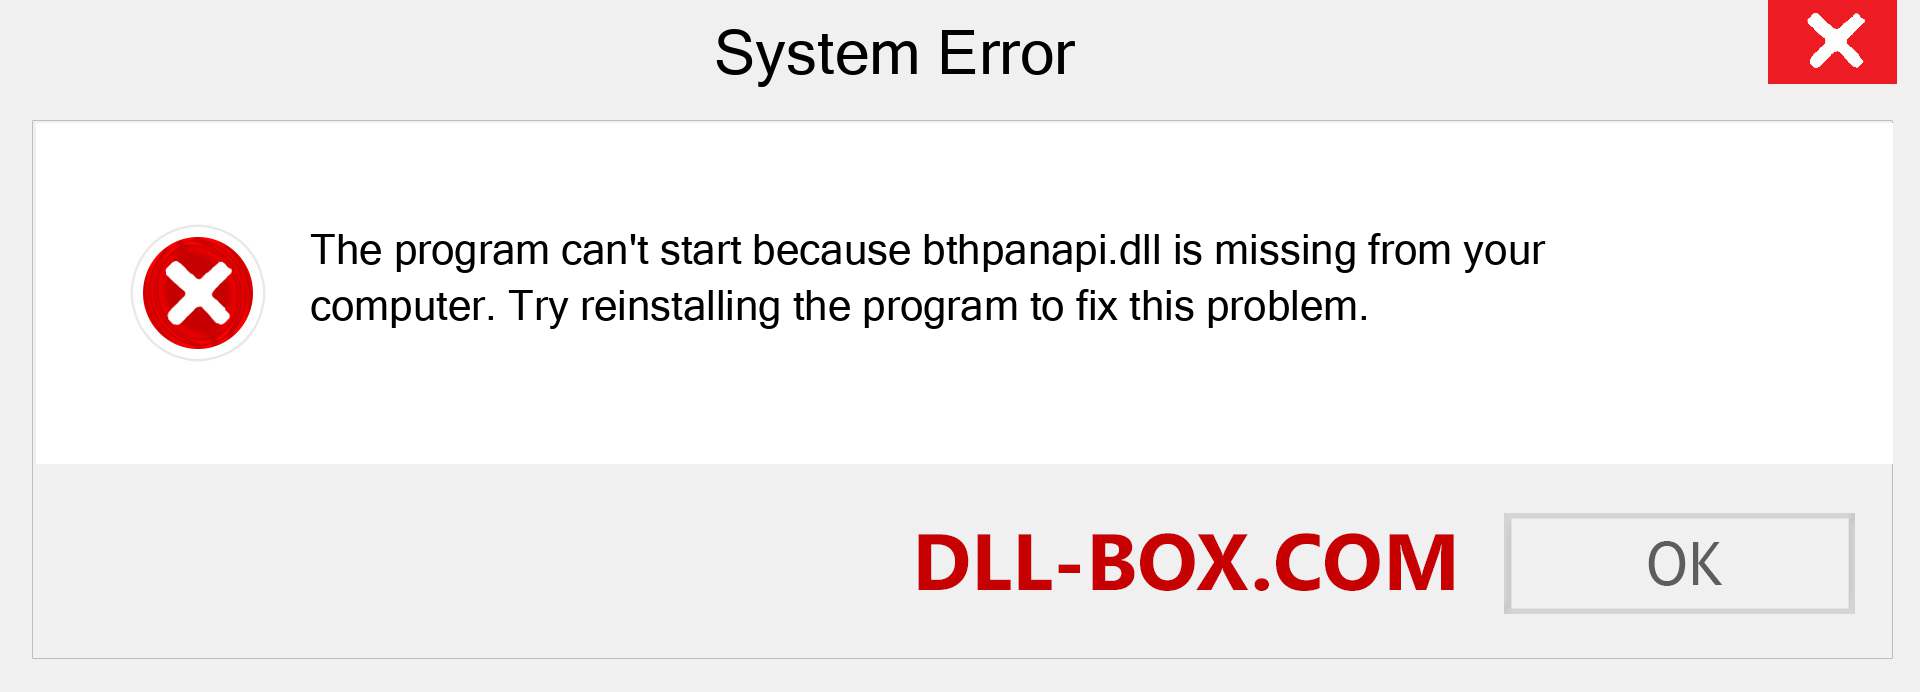  bthpanapi.dll file is missing?. Download for Windows 7, 8, 10 - Fix  bthpanapi dll Missing Error on Windows, photos, images